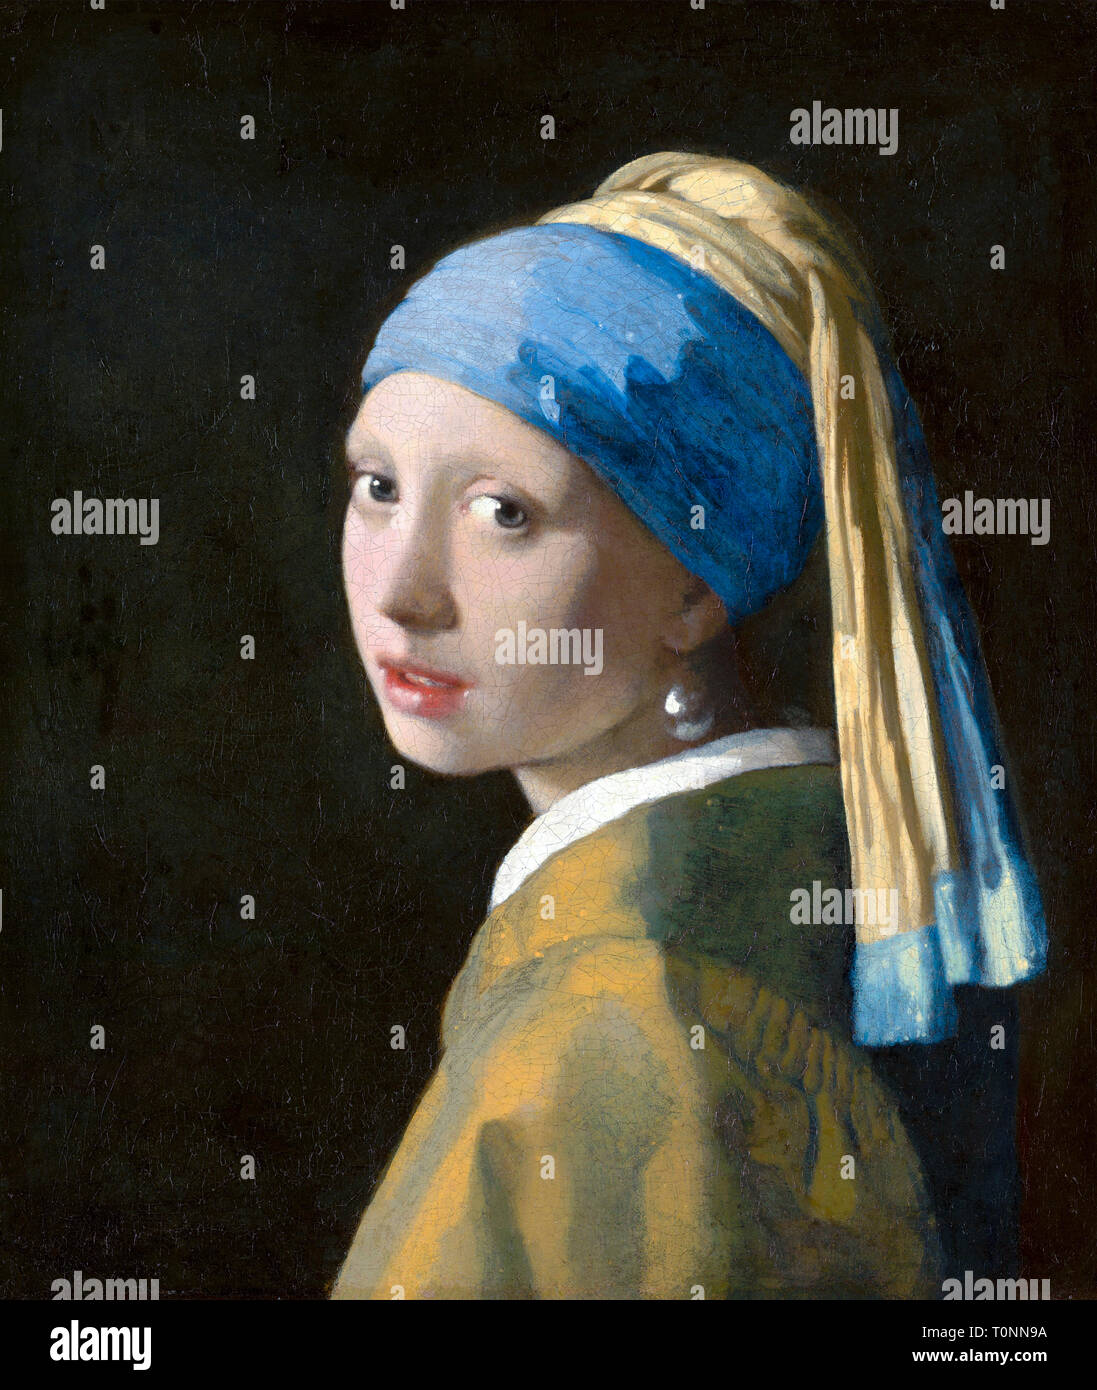 Johannes Vermeer, Girl with a Pearl Earring, portrait, c. 1665 Stock Photo